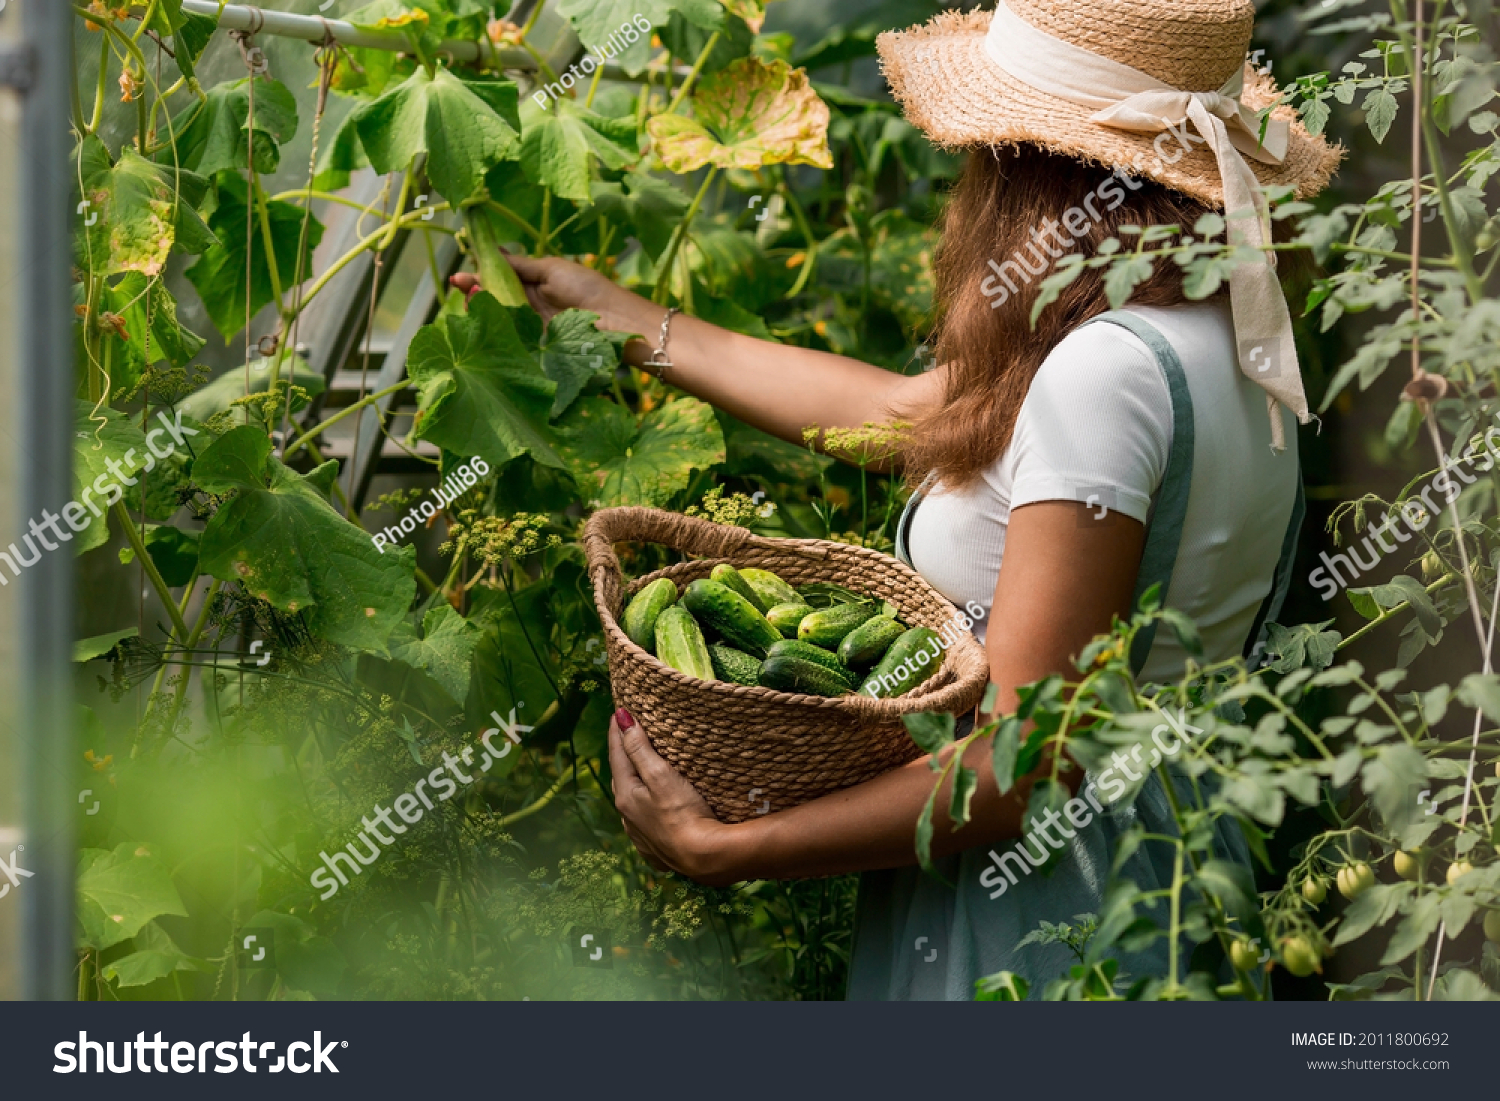 A farmer woman in a cotton apron tears cucumbers in a greenhouse into a wicker basket. The concept of harvesting. Summer and autumn on the farm are filled with organic themes. Close-up. #2011800692